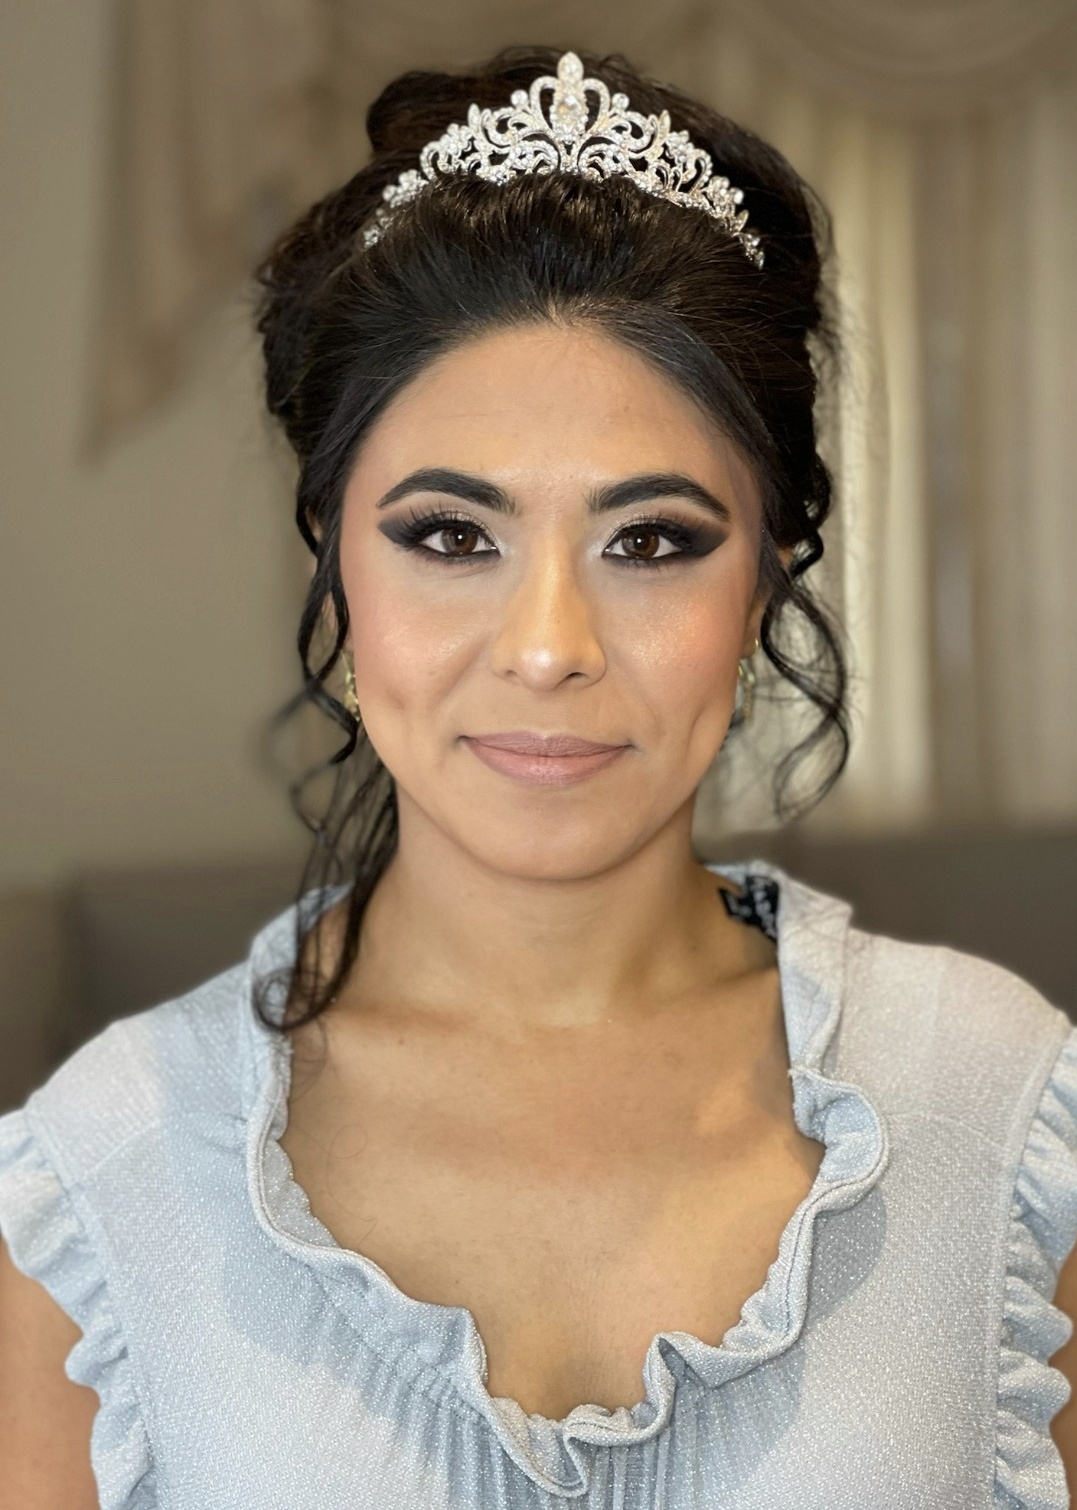 hair and makeup on bride with crown tiara